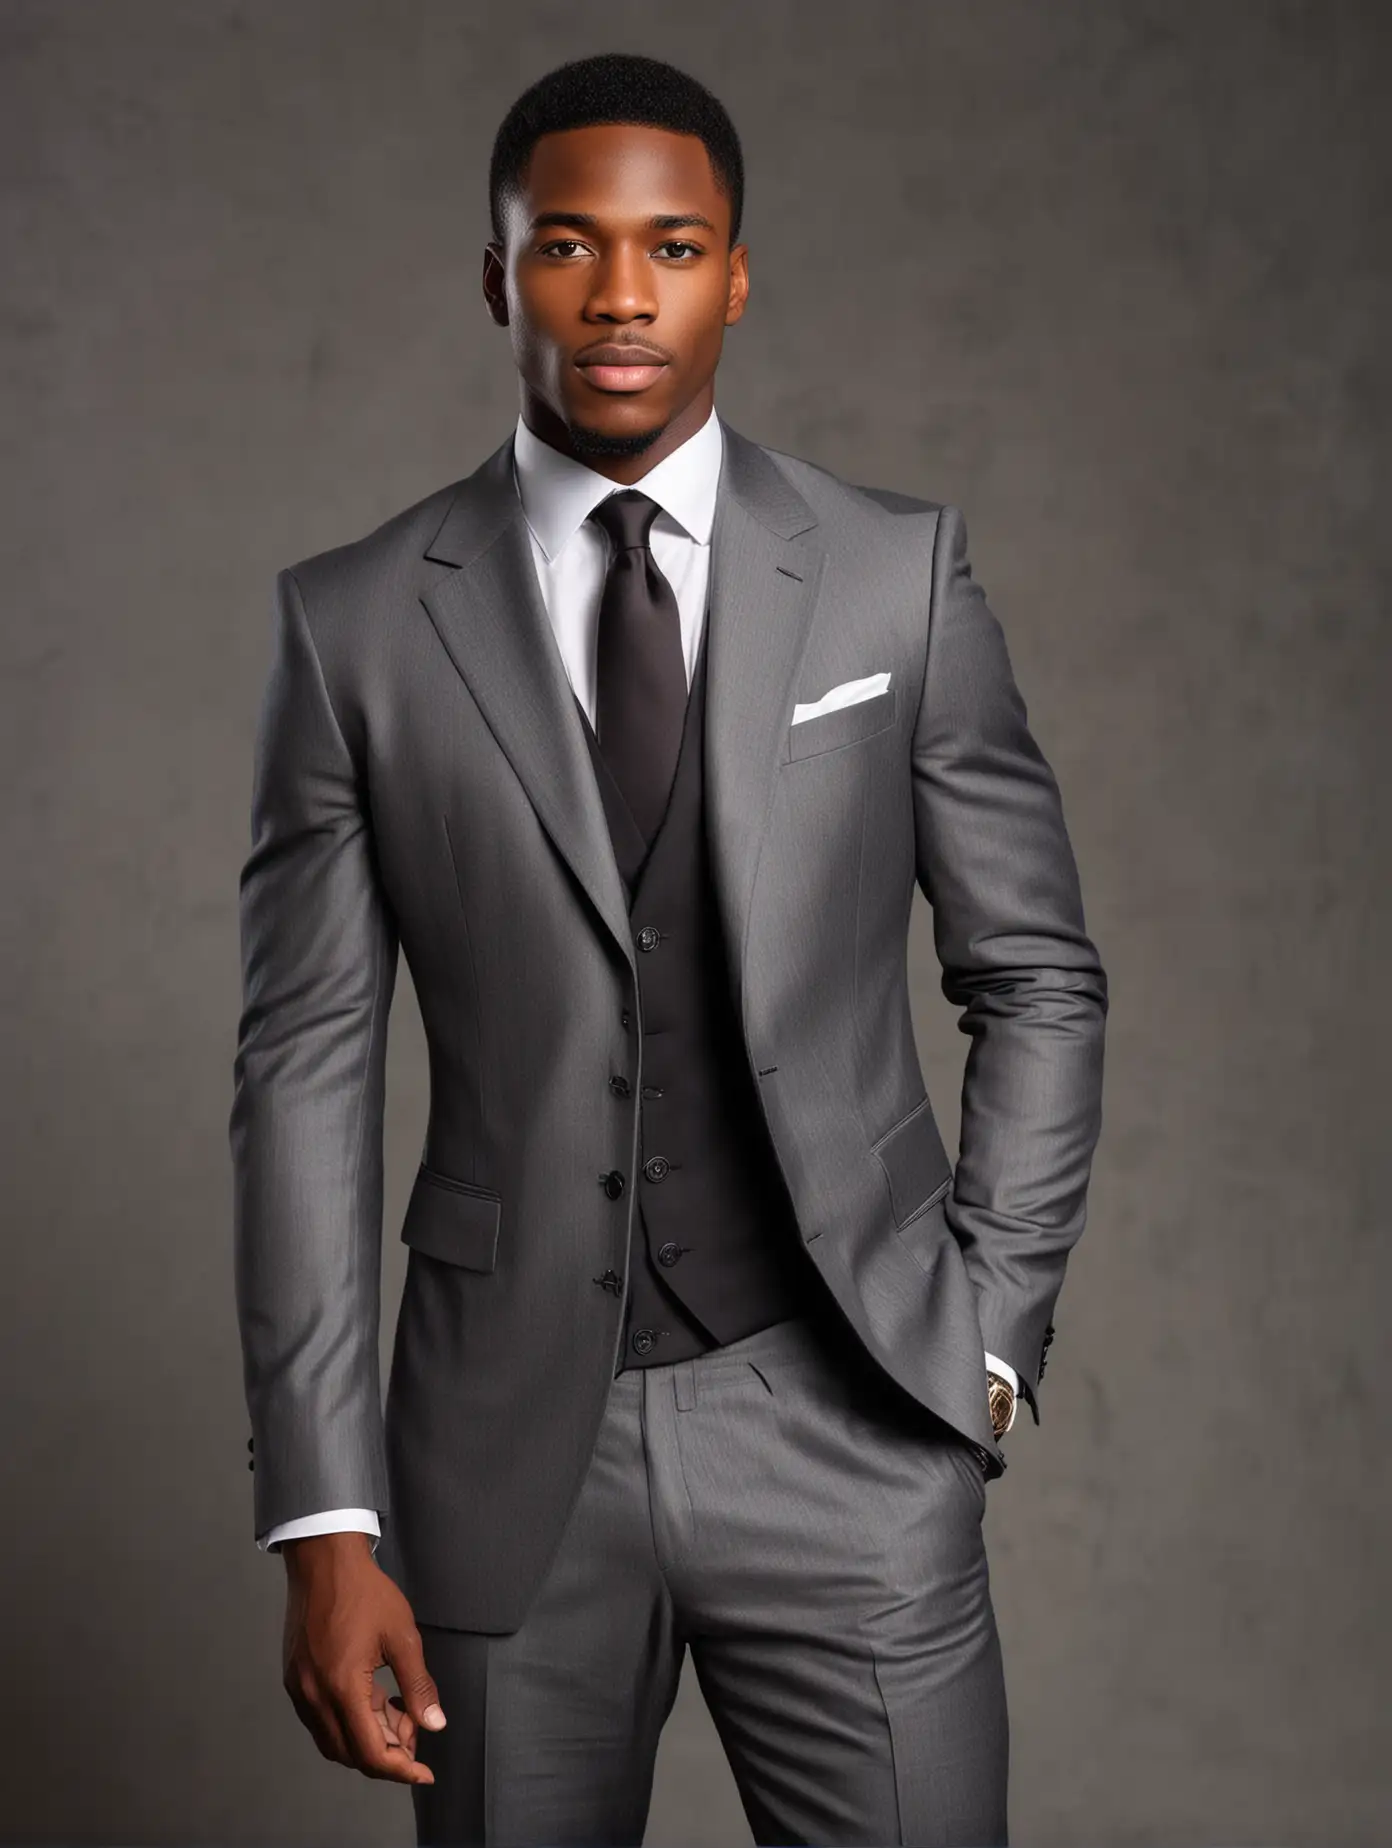 African American manman, work photo, high-end suit, facing the camera, exquisite facial features, professional photography skills, full body photo